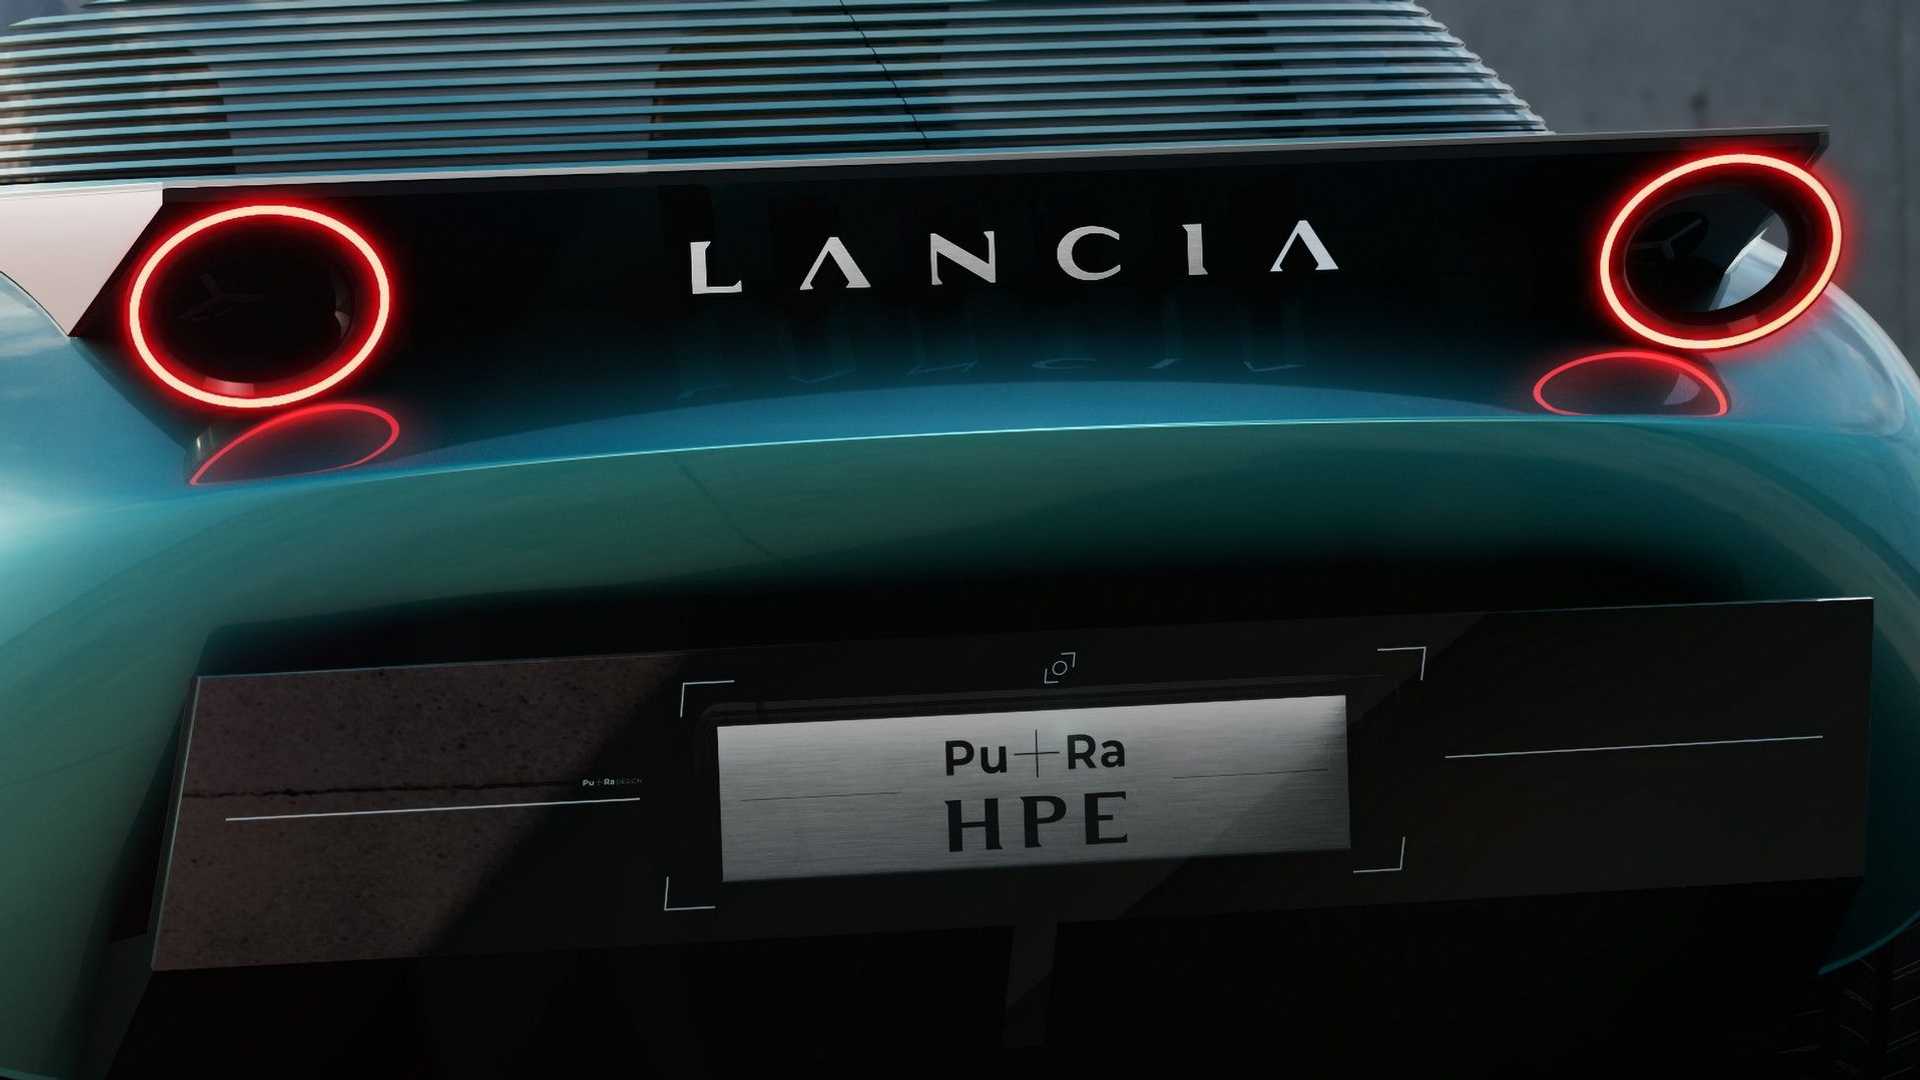 lancia pu+ra hpe concept debuts as all-electric coupe with stratos-inspired design